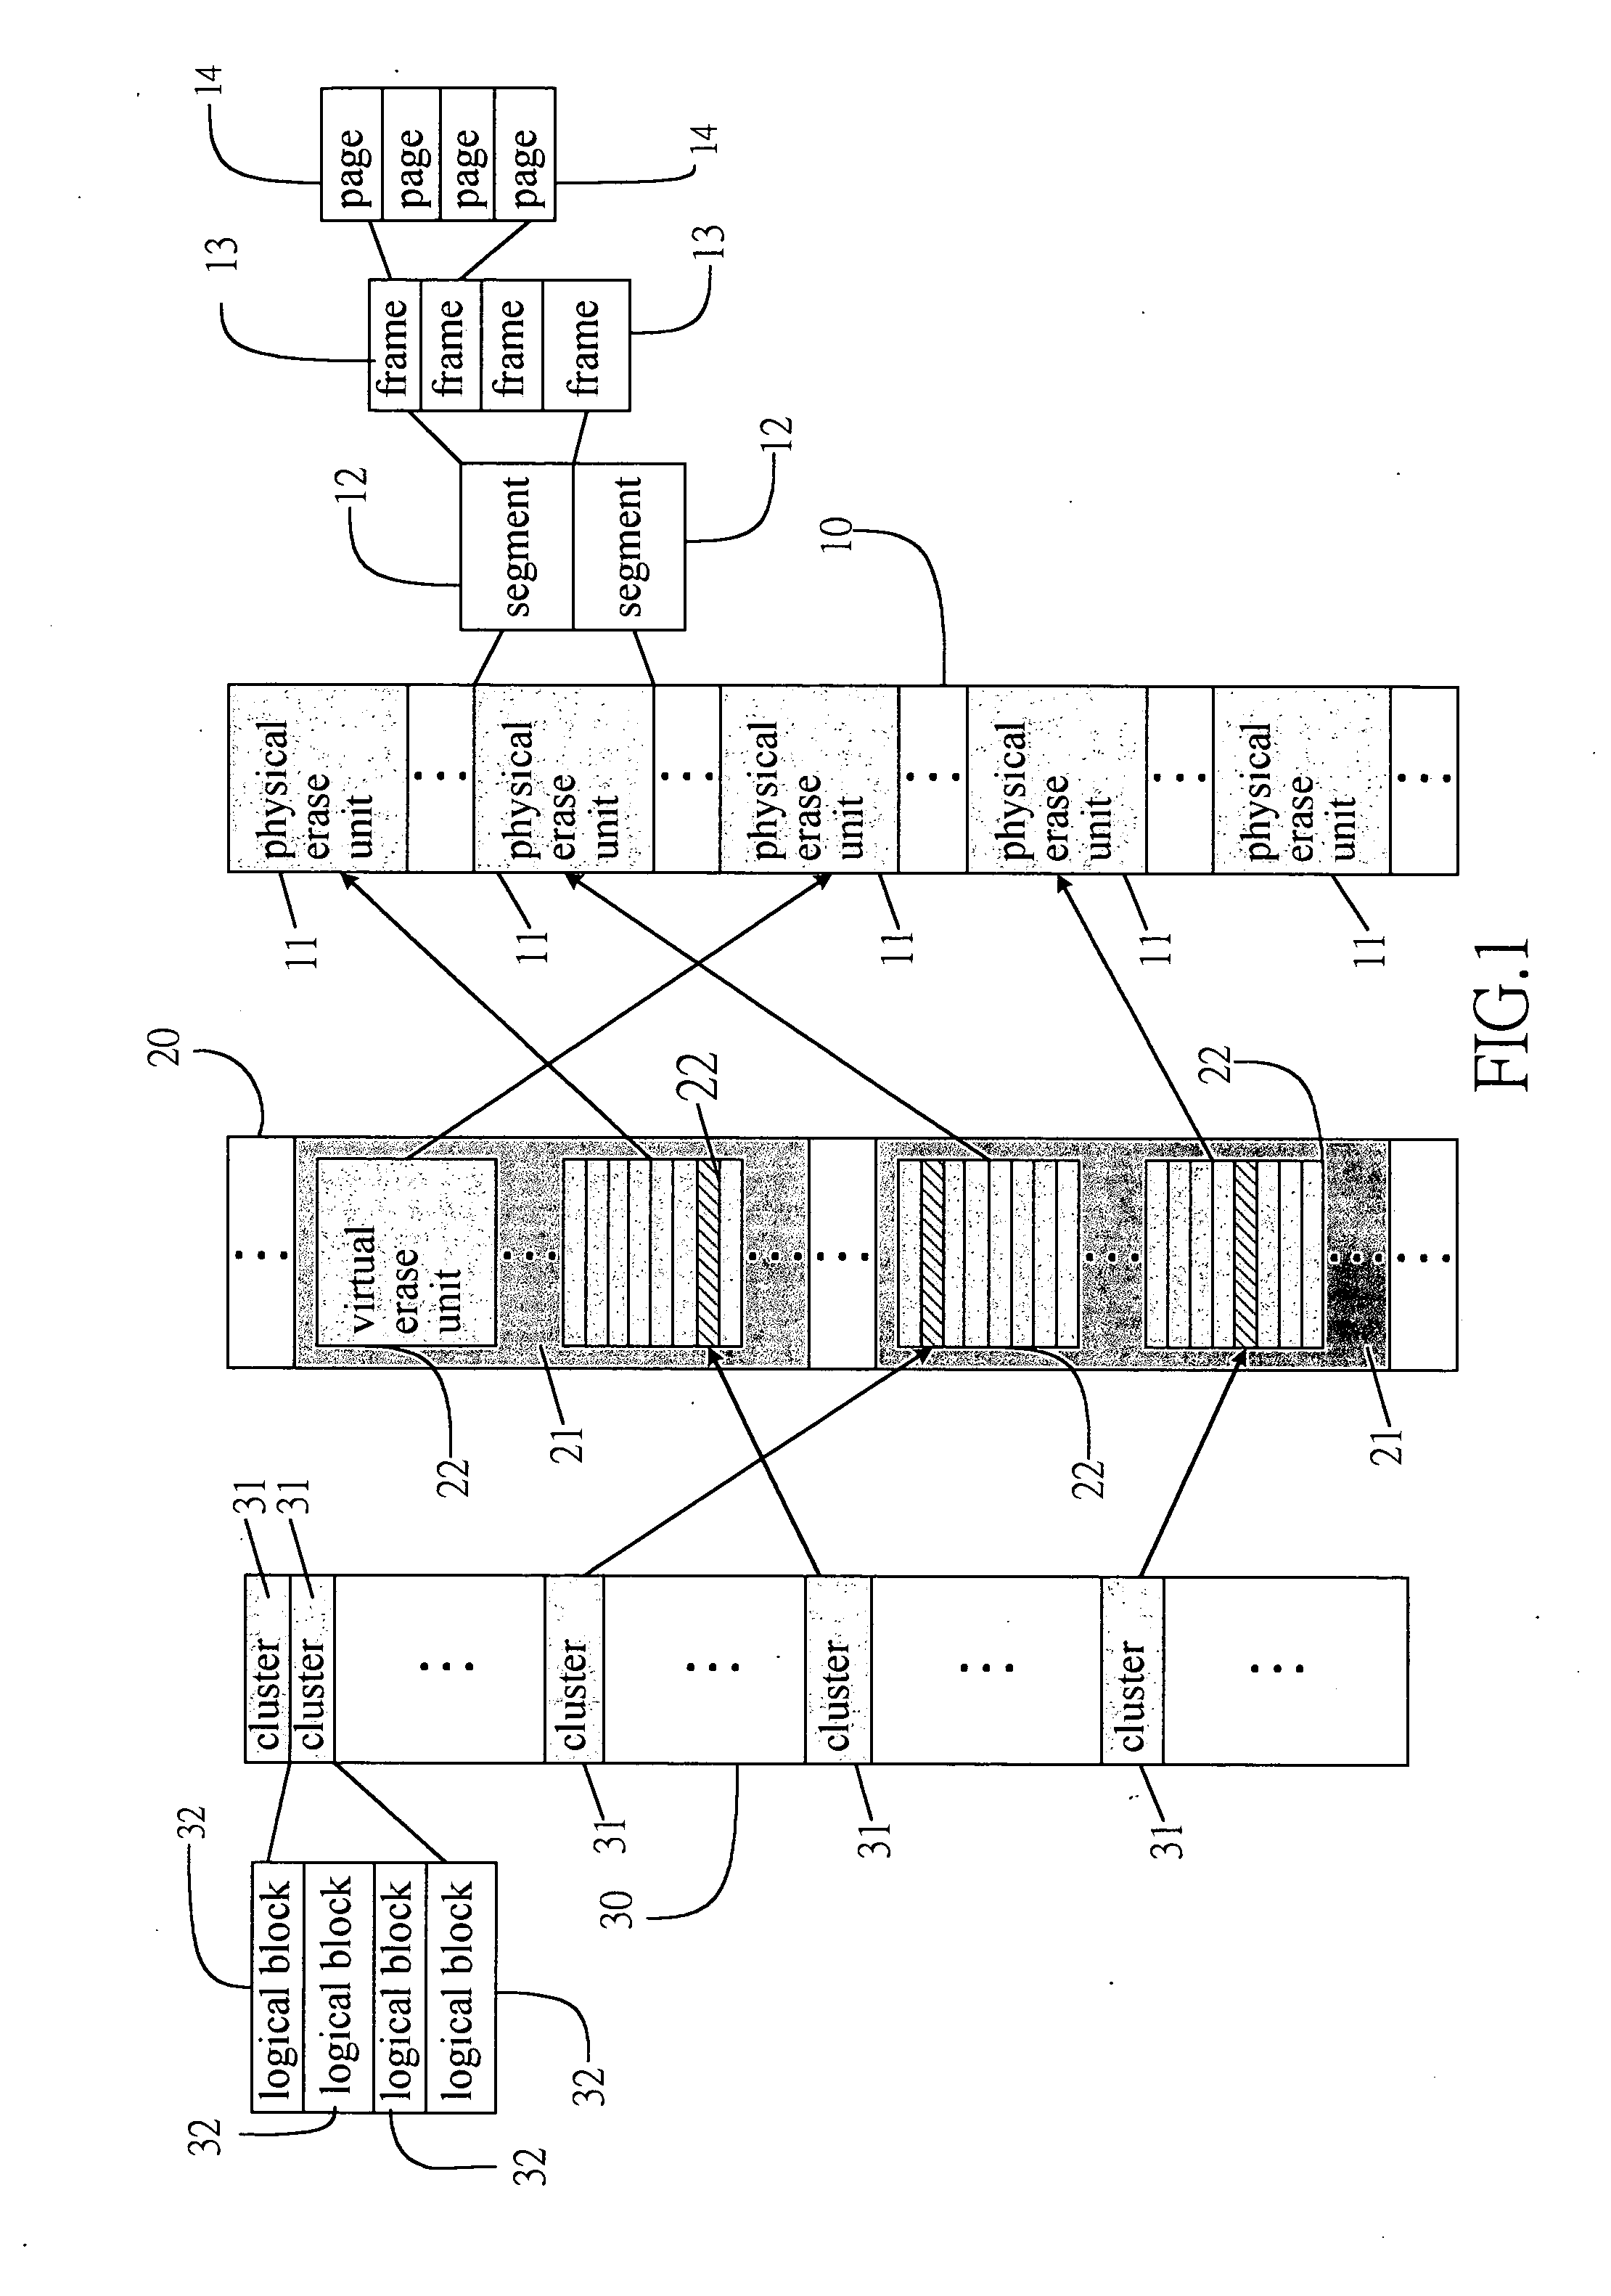 System and method for configuration and management of flash memory